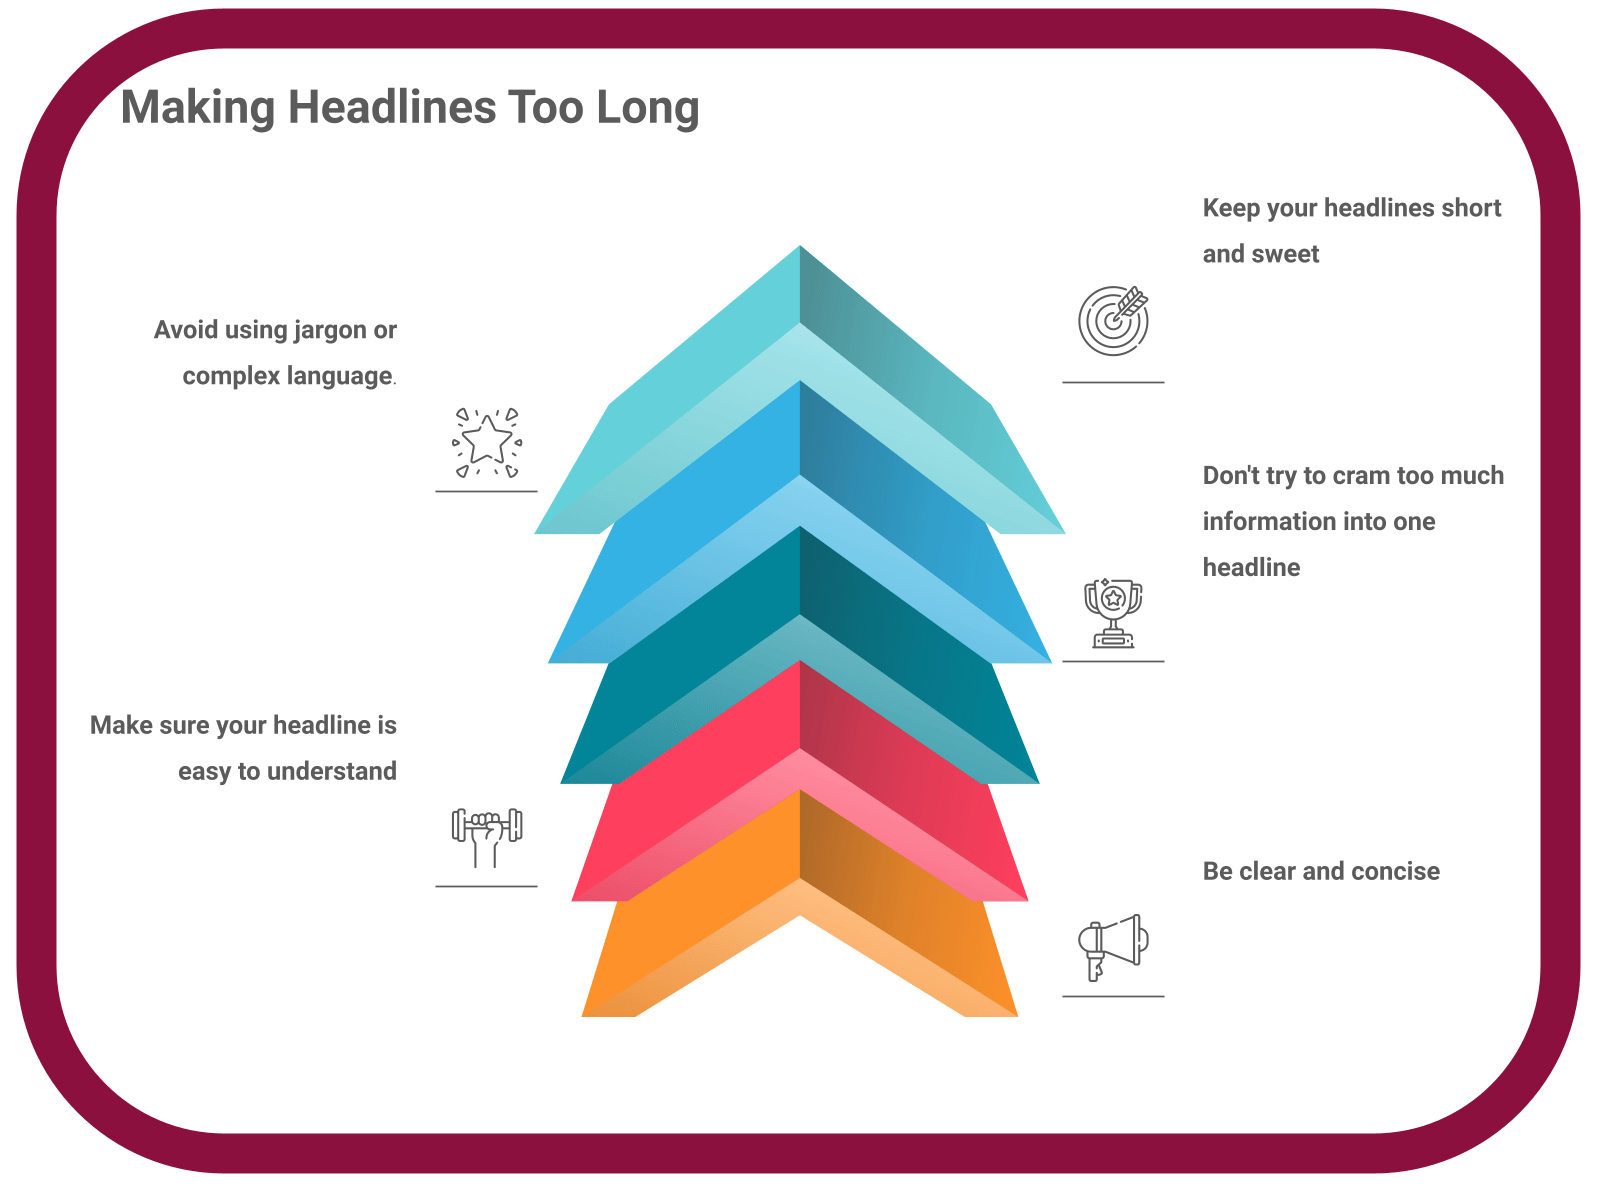 INFOGRAPHIC: Making headlines too long - Poll the People